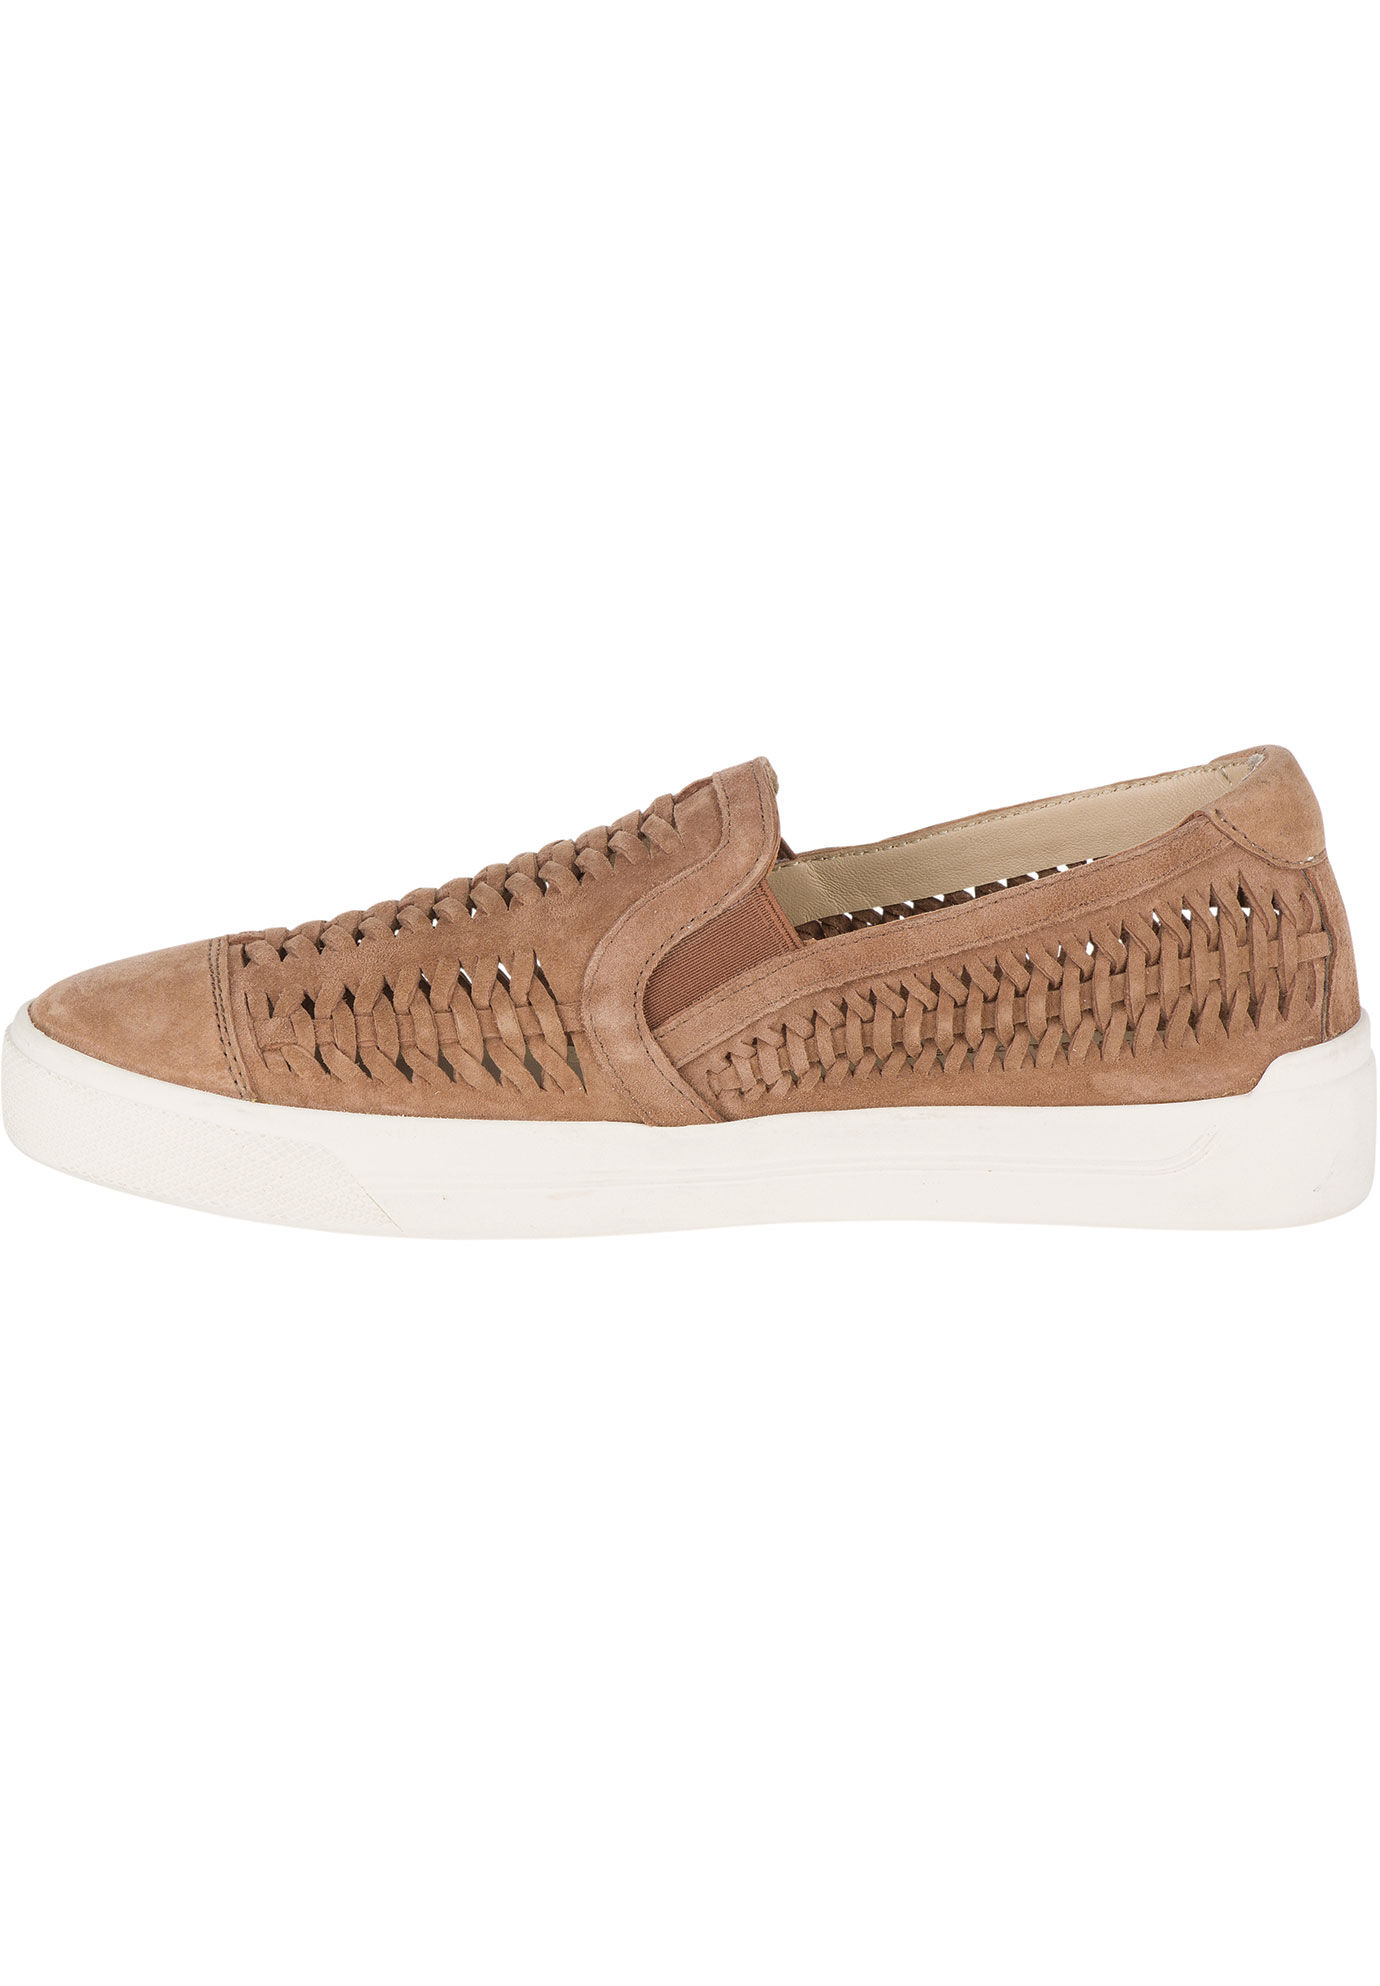 Hush Puppies Power Walker Taupe